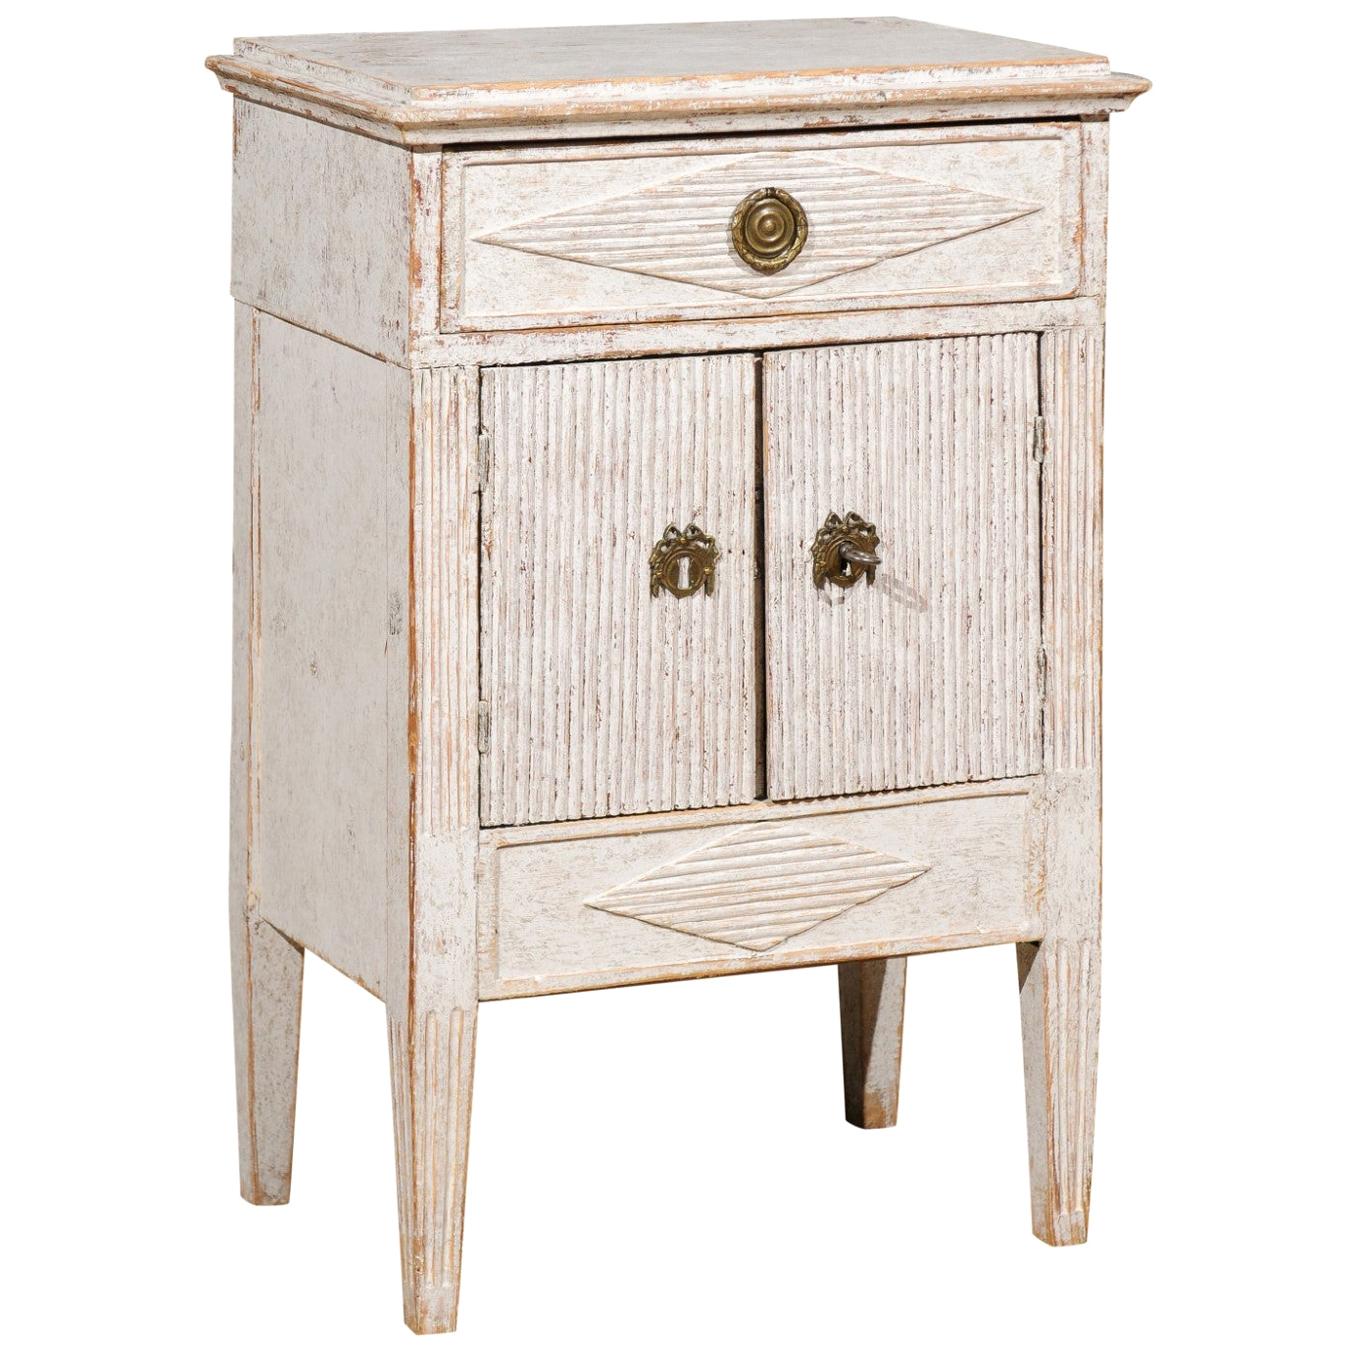 Swedish Gustavian Style 19th Century Painted Cabinet with Reeded Diamond Motifs